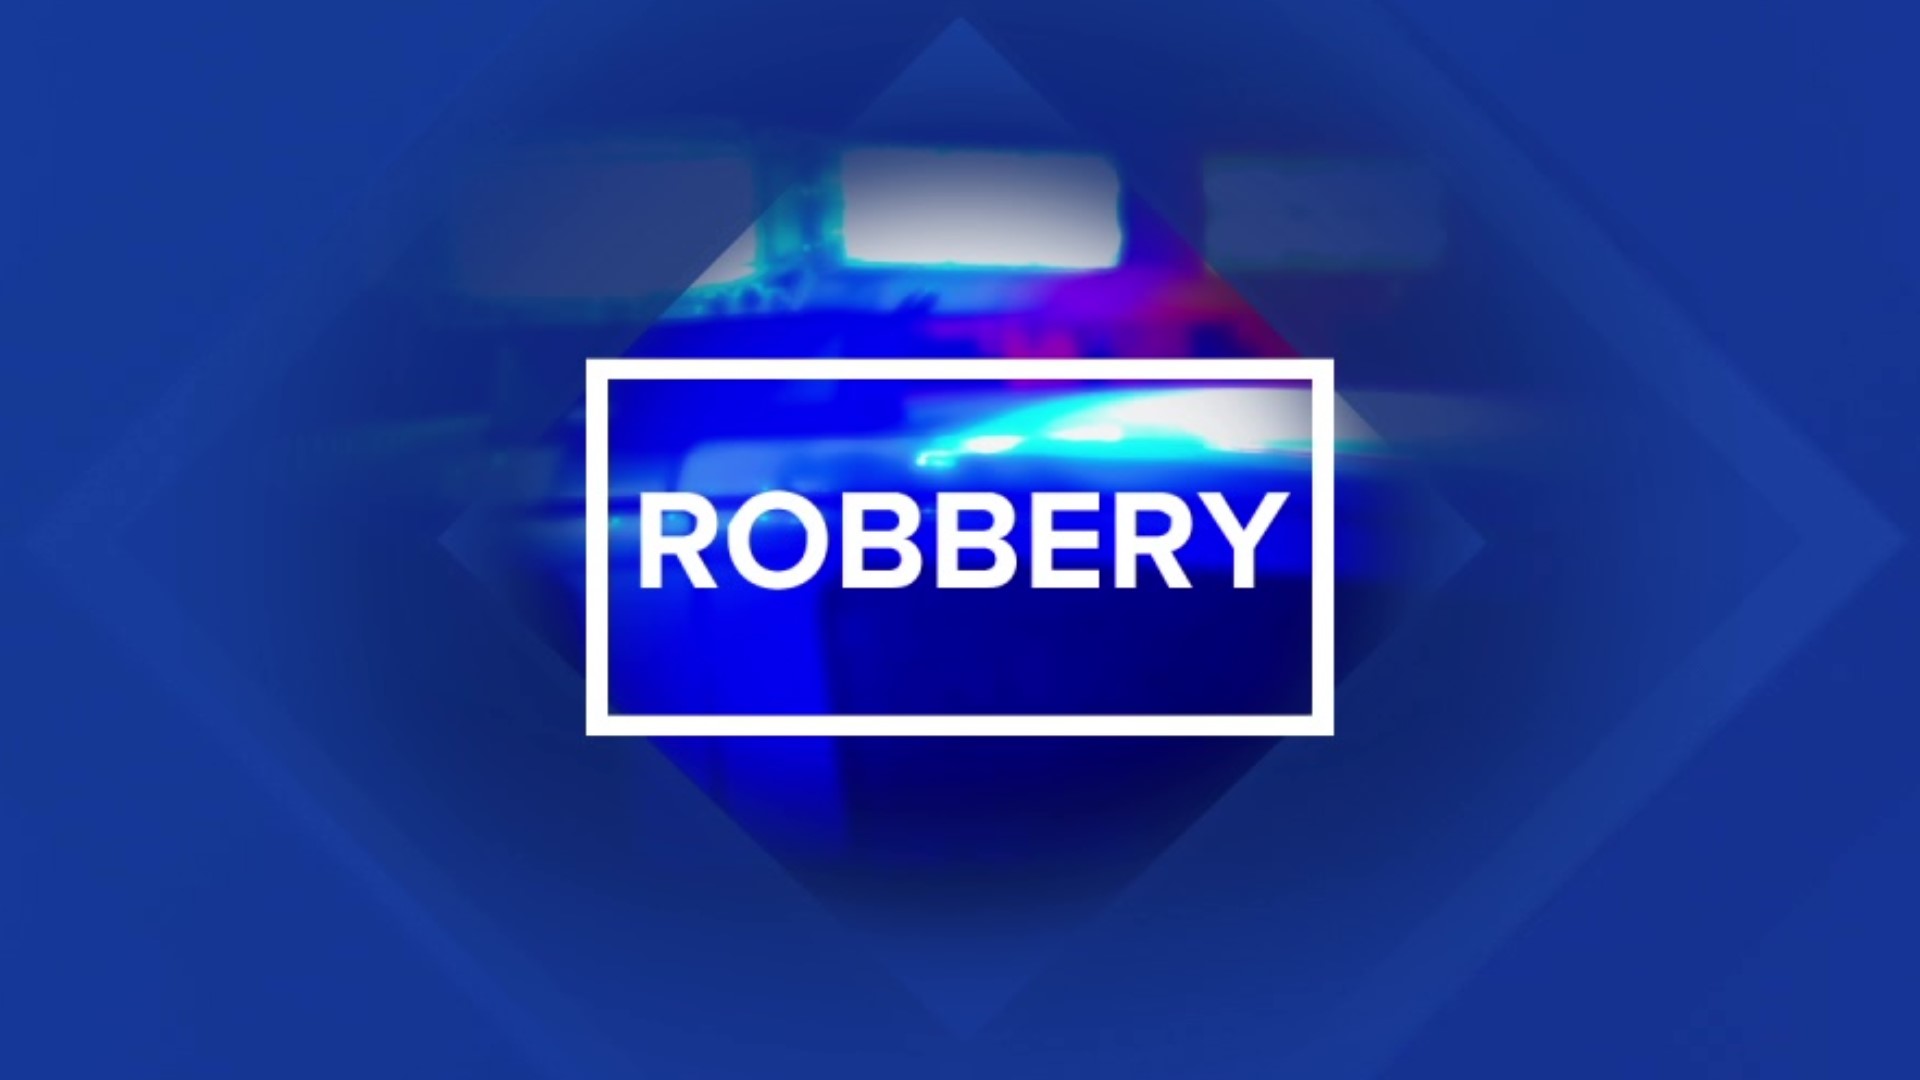 Police say a man robbed a store in Jersey Shore on Thursday morning.